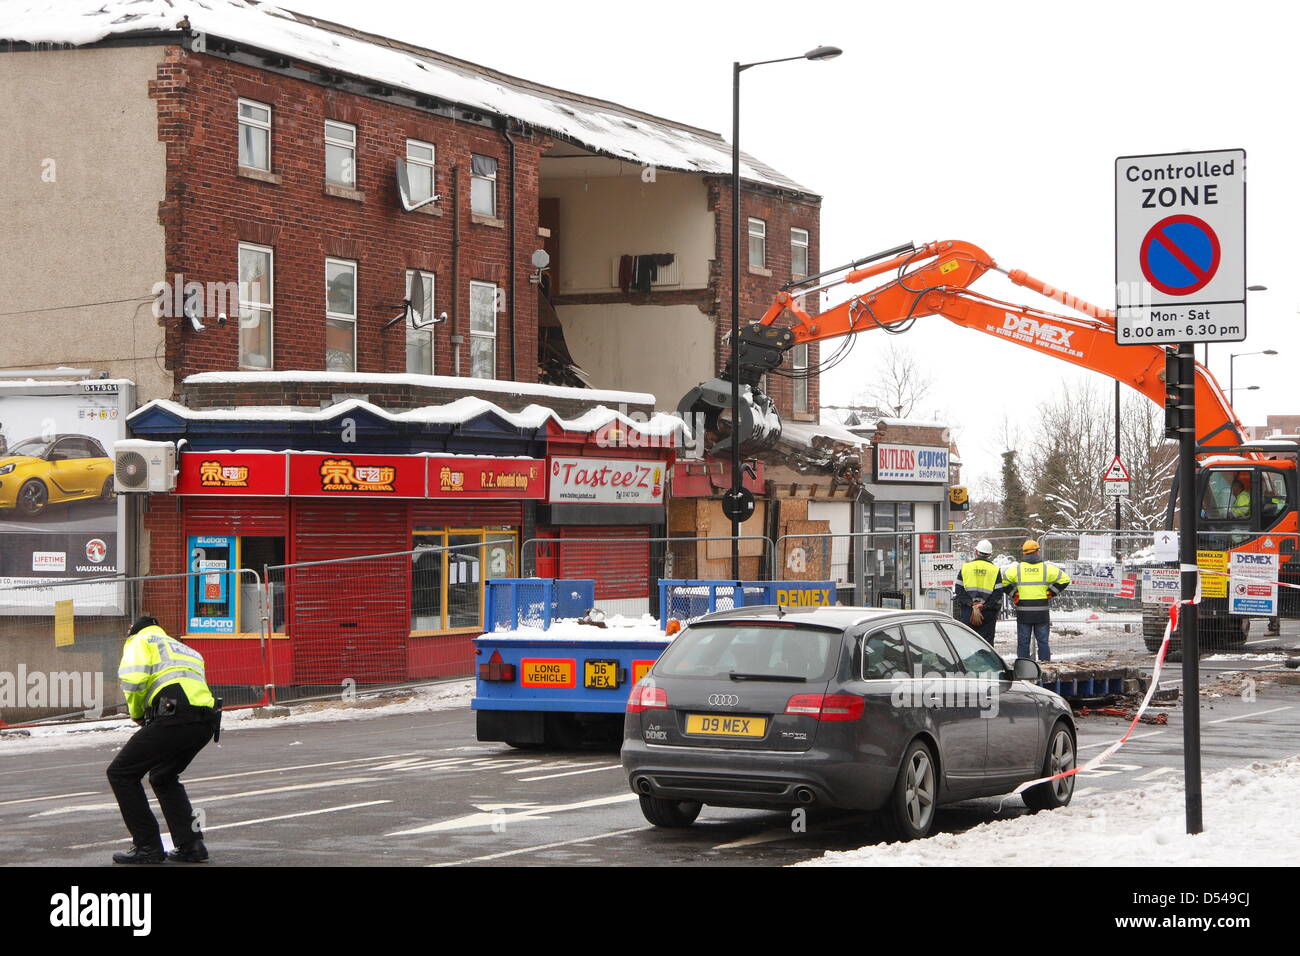 Sheffield, UK. 24th March 2013. Demolition begins on a three storey building following its collapse yesterday in the city centre Stock Photo